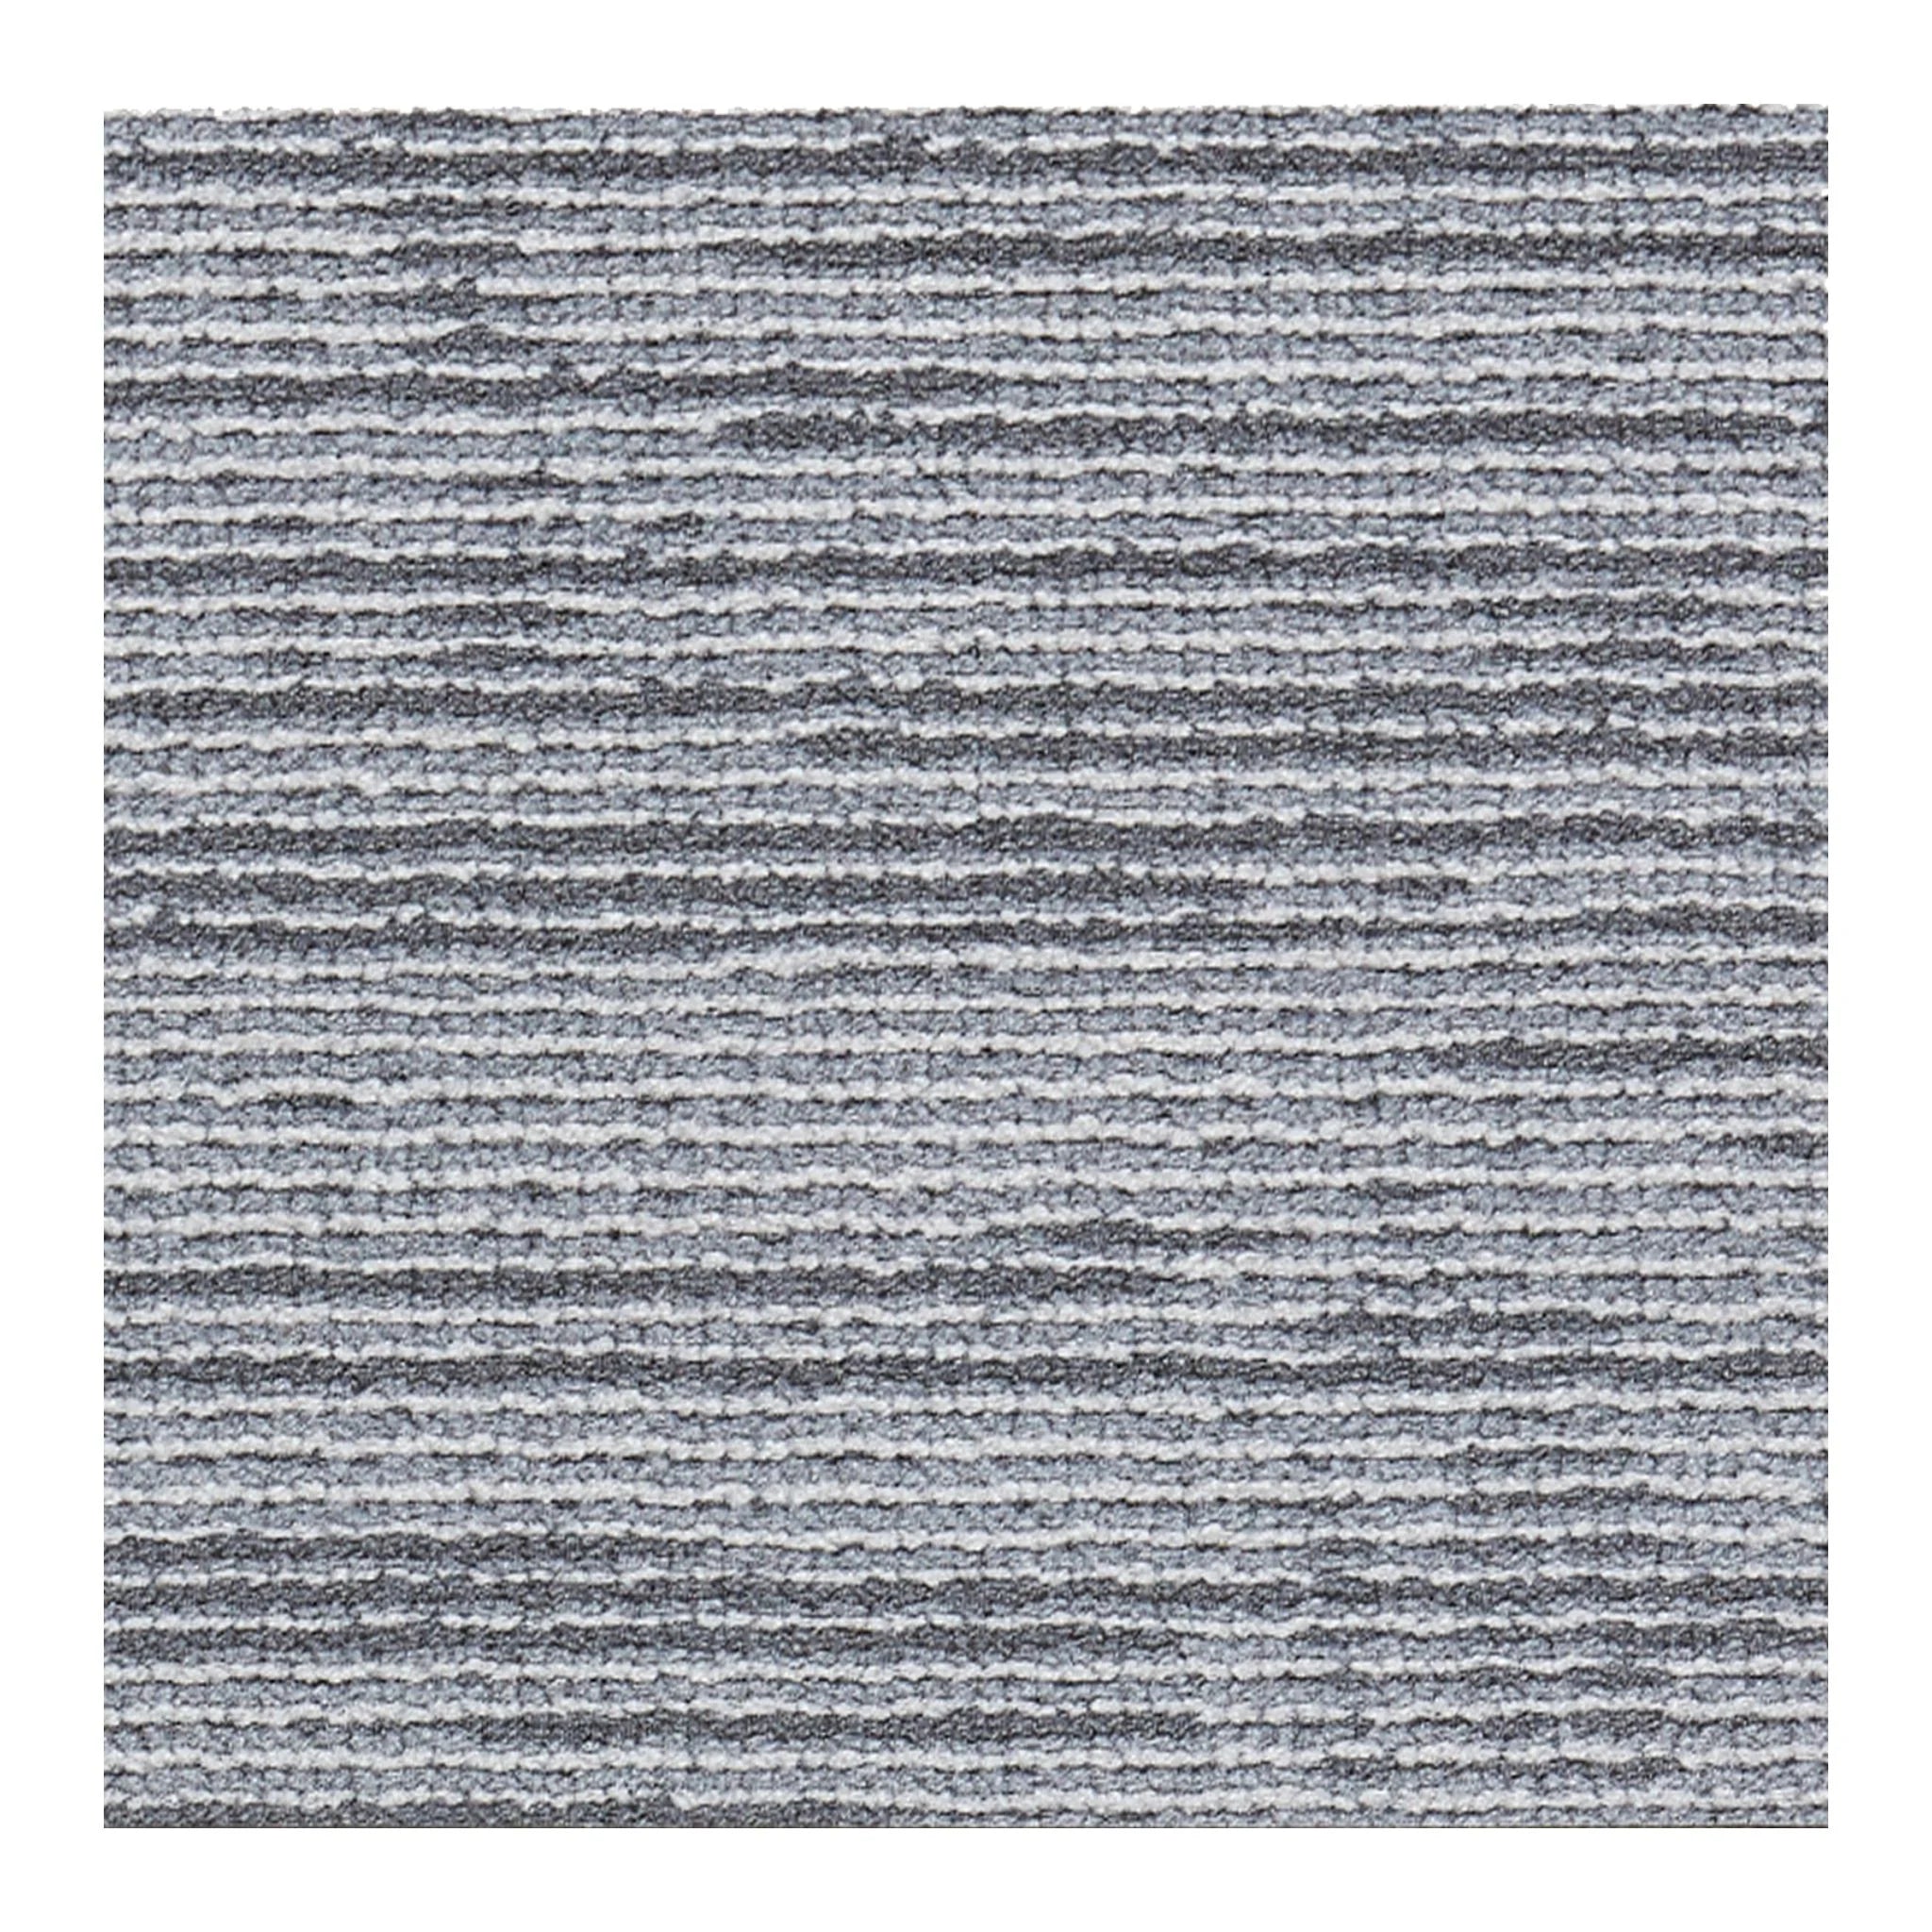 full view of a grey textured carpet, ideal for modern home interiors